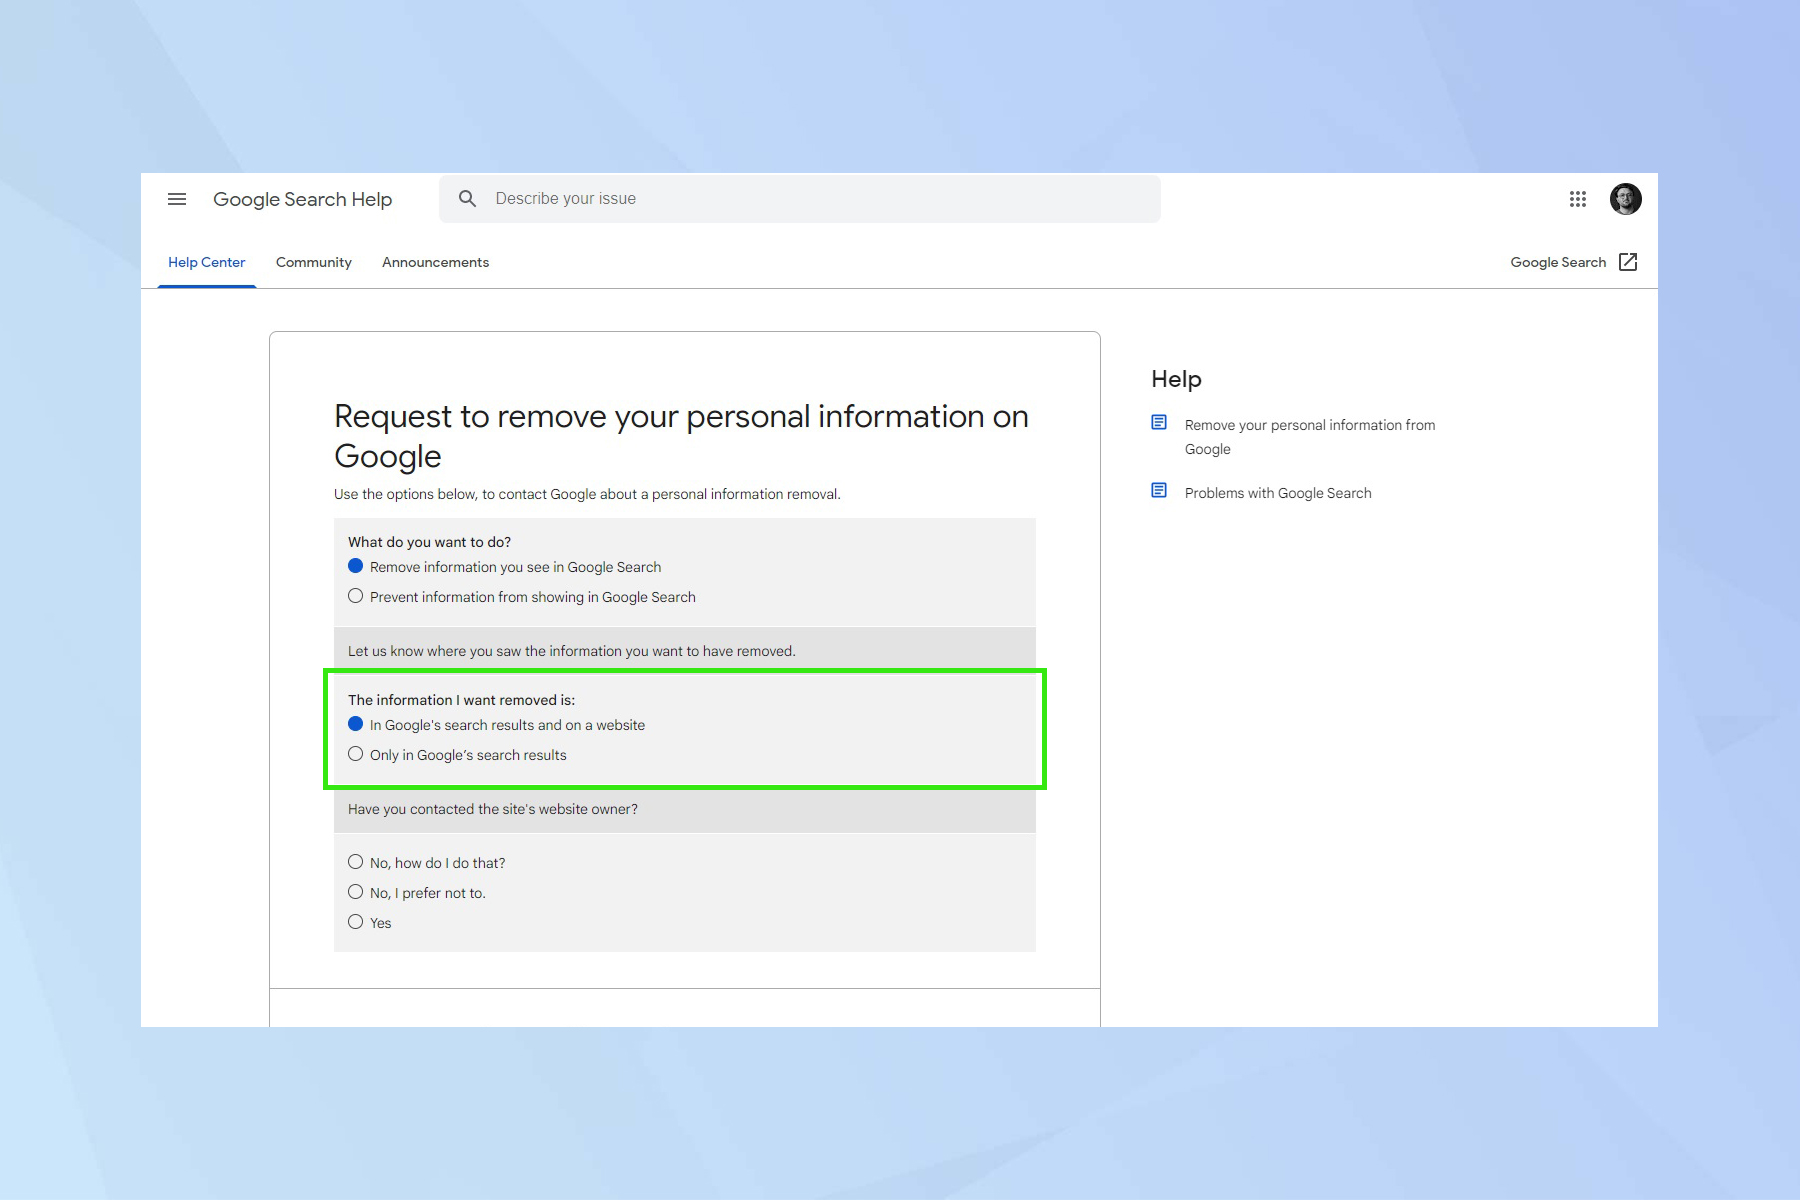 A screenshot showing the Google Search removal form - demonstrating how to remove contact details from Google Search